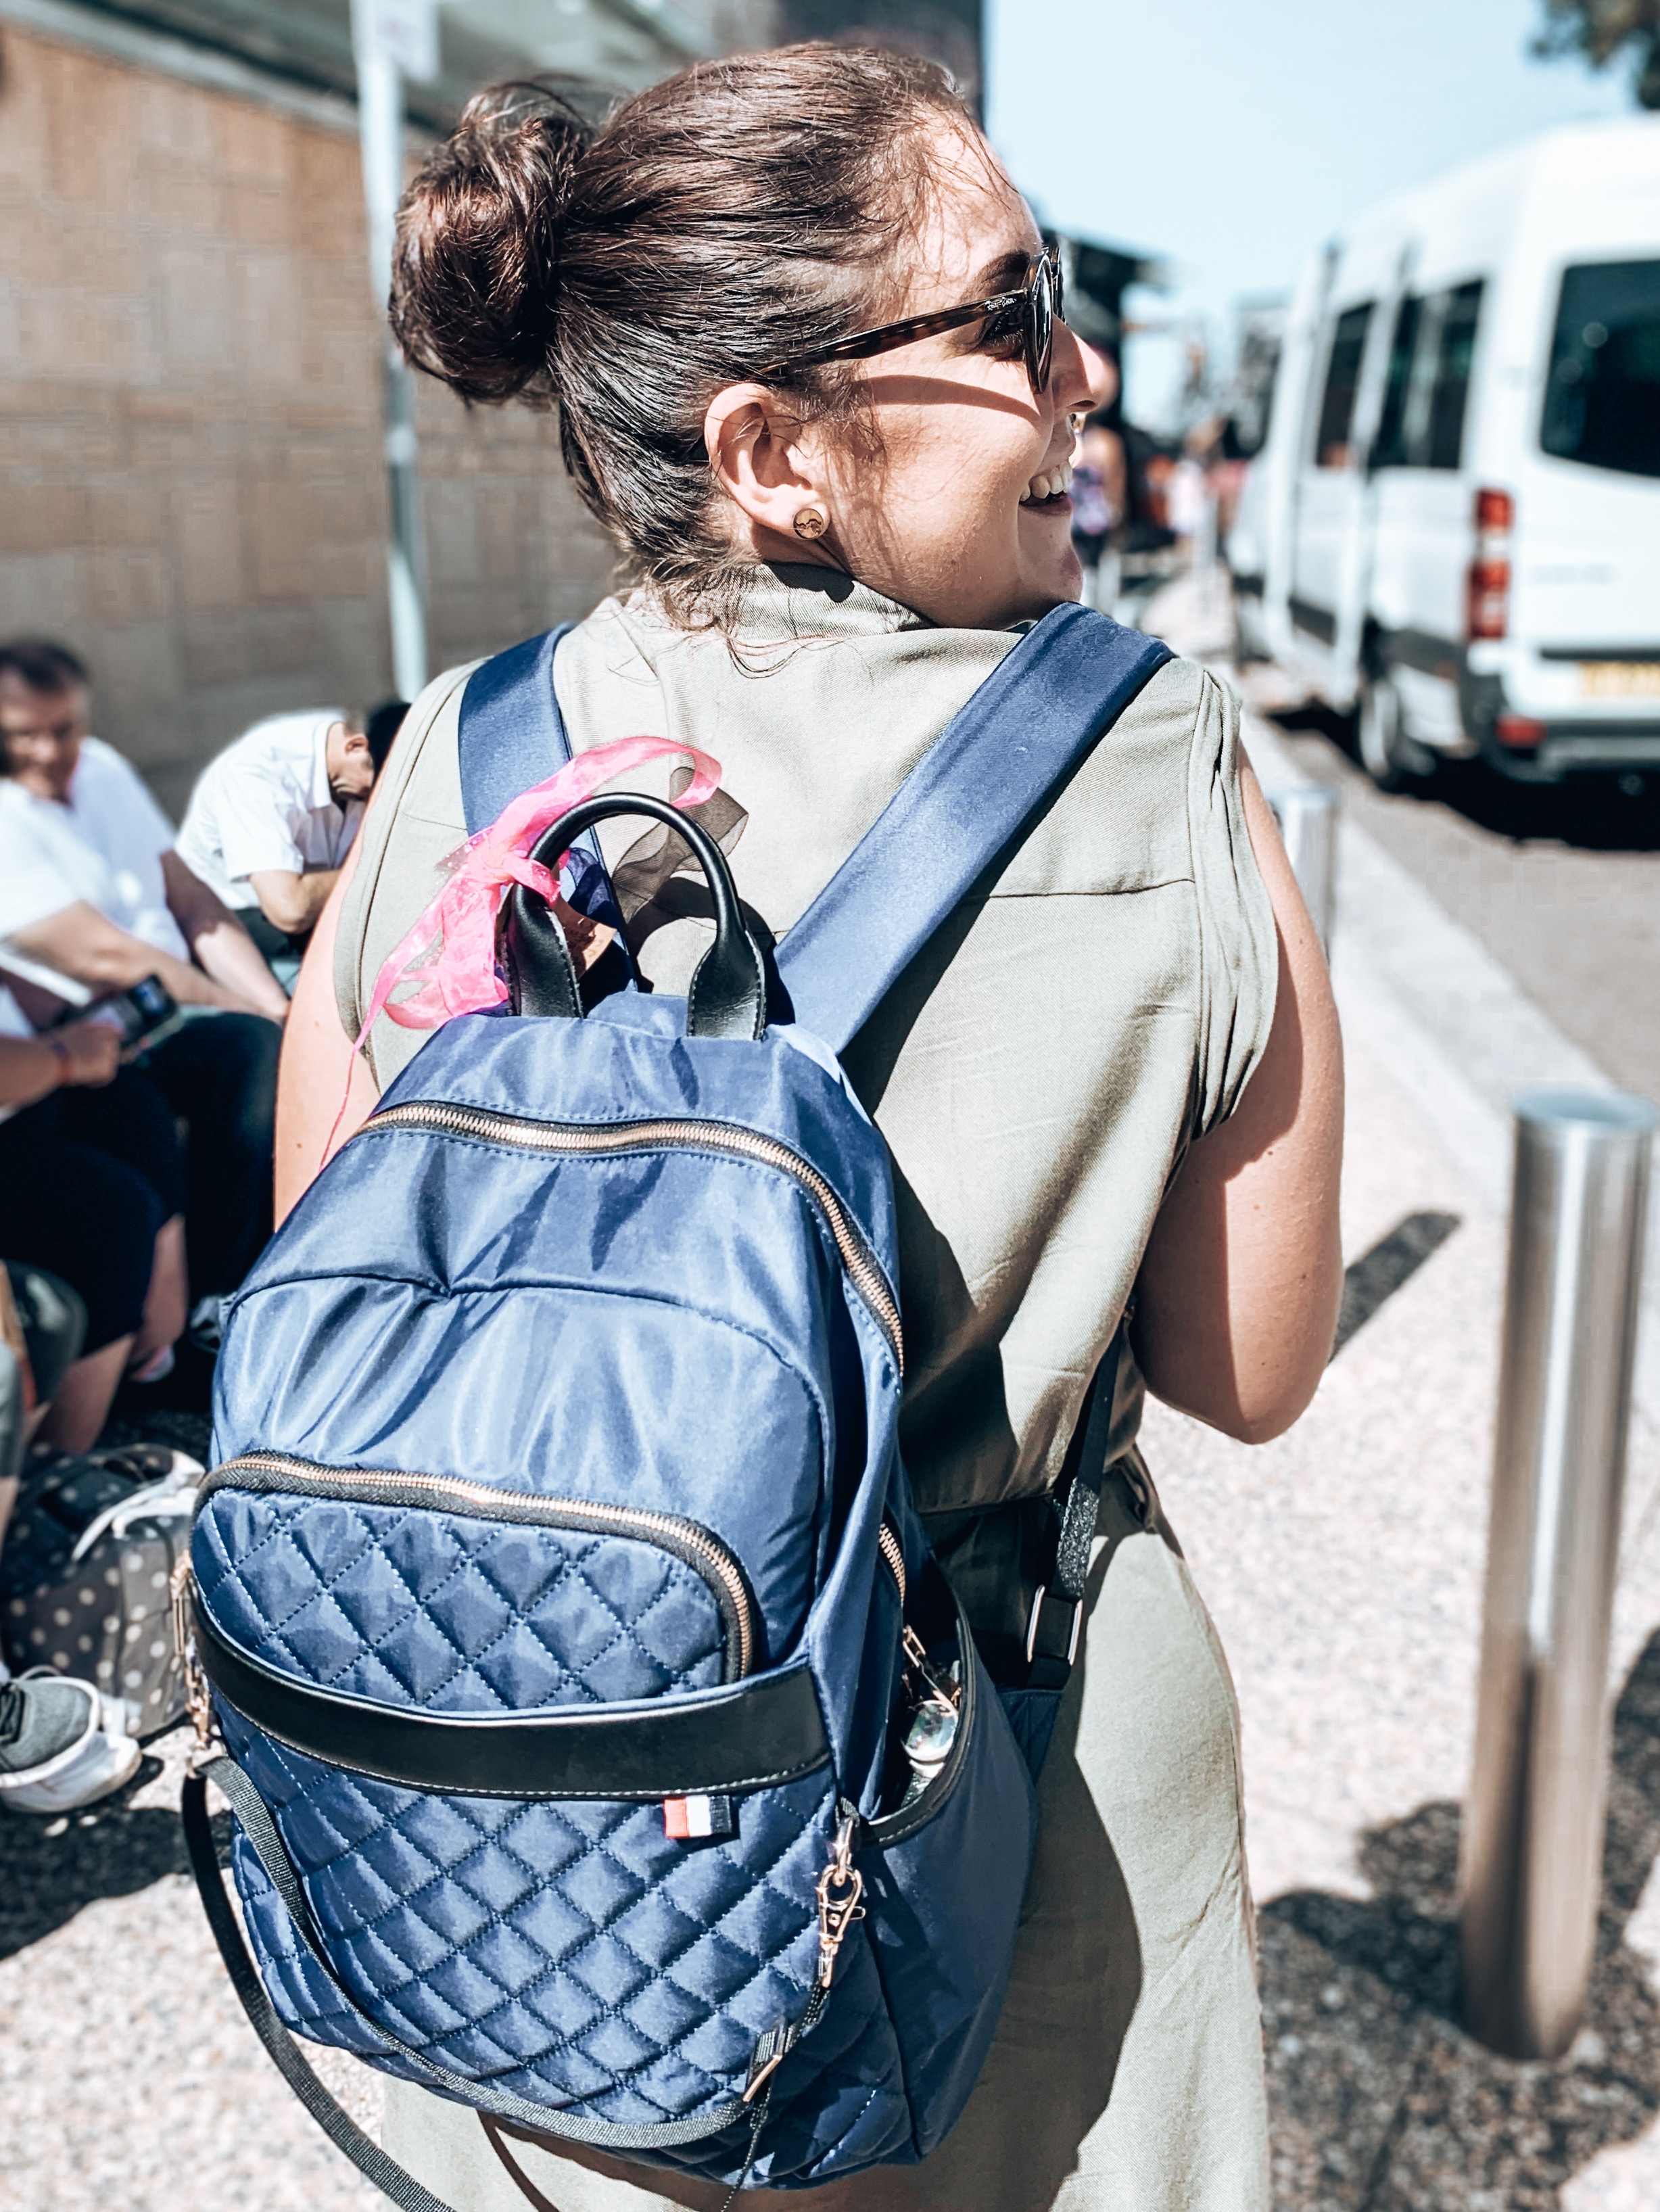 Lady with navy day backpack on her back